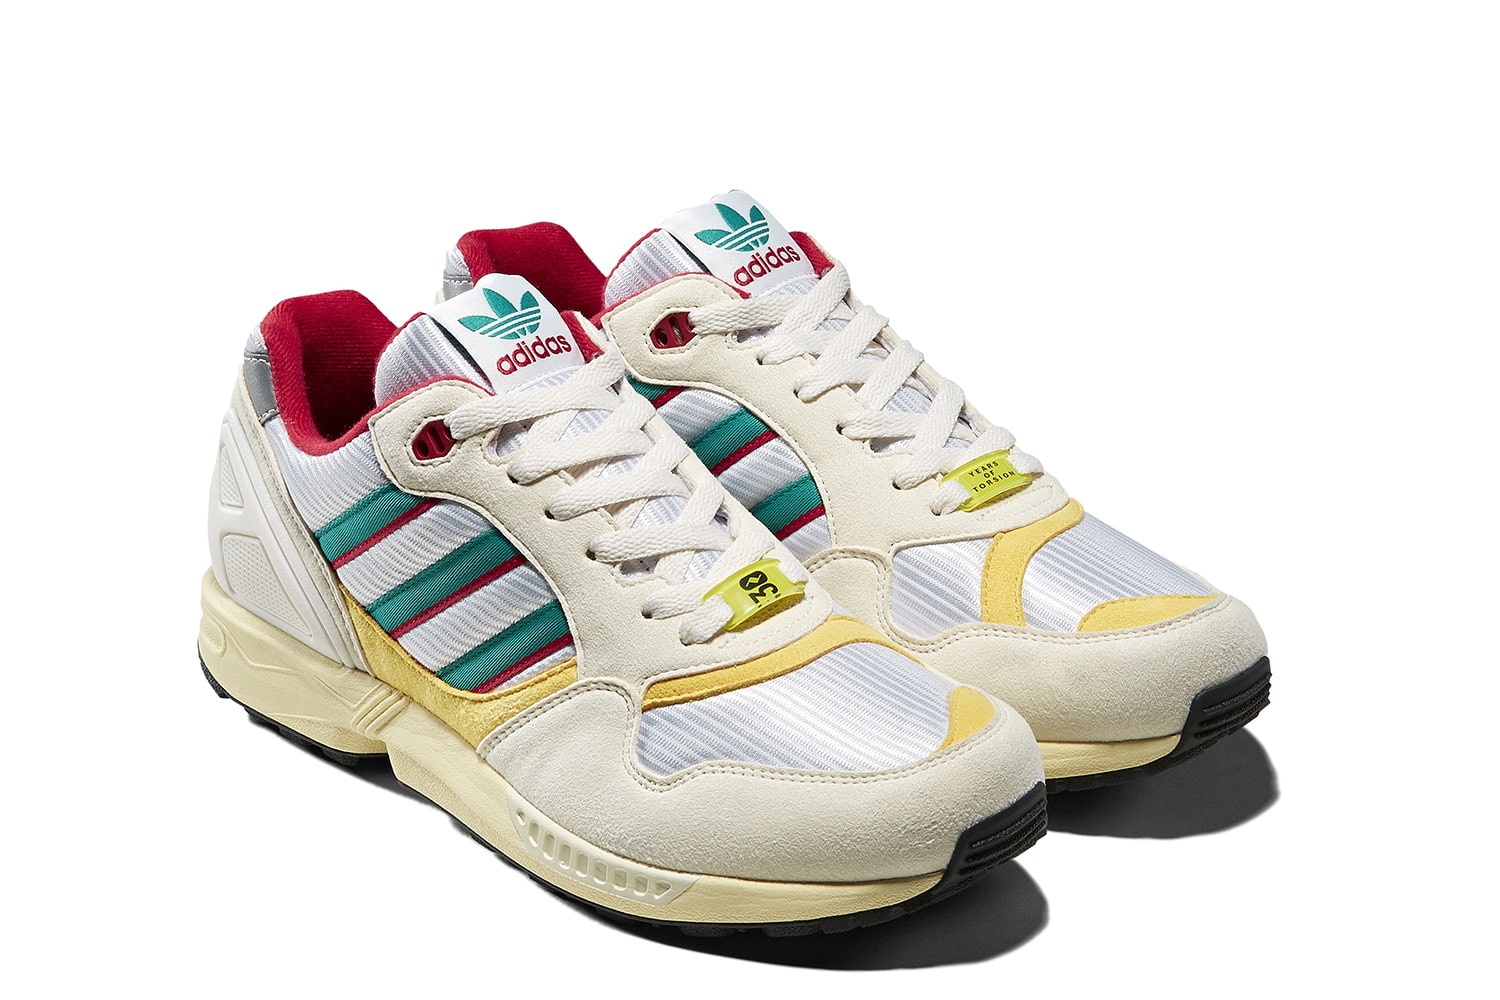 adidas ZX 6000 OG 30 years of Torsion 4